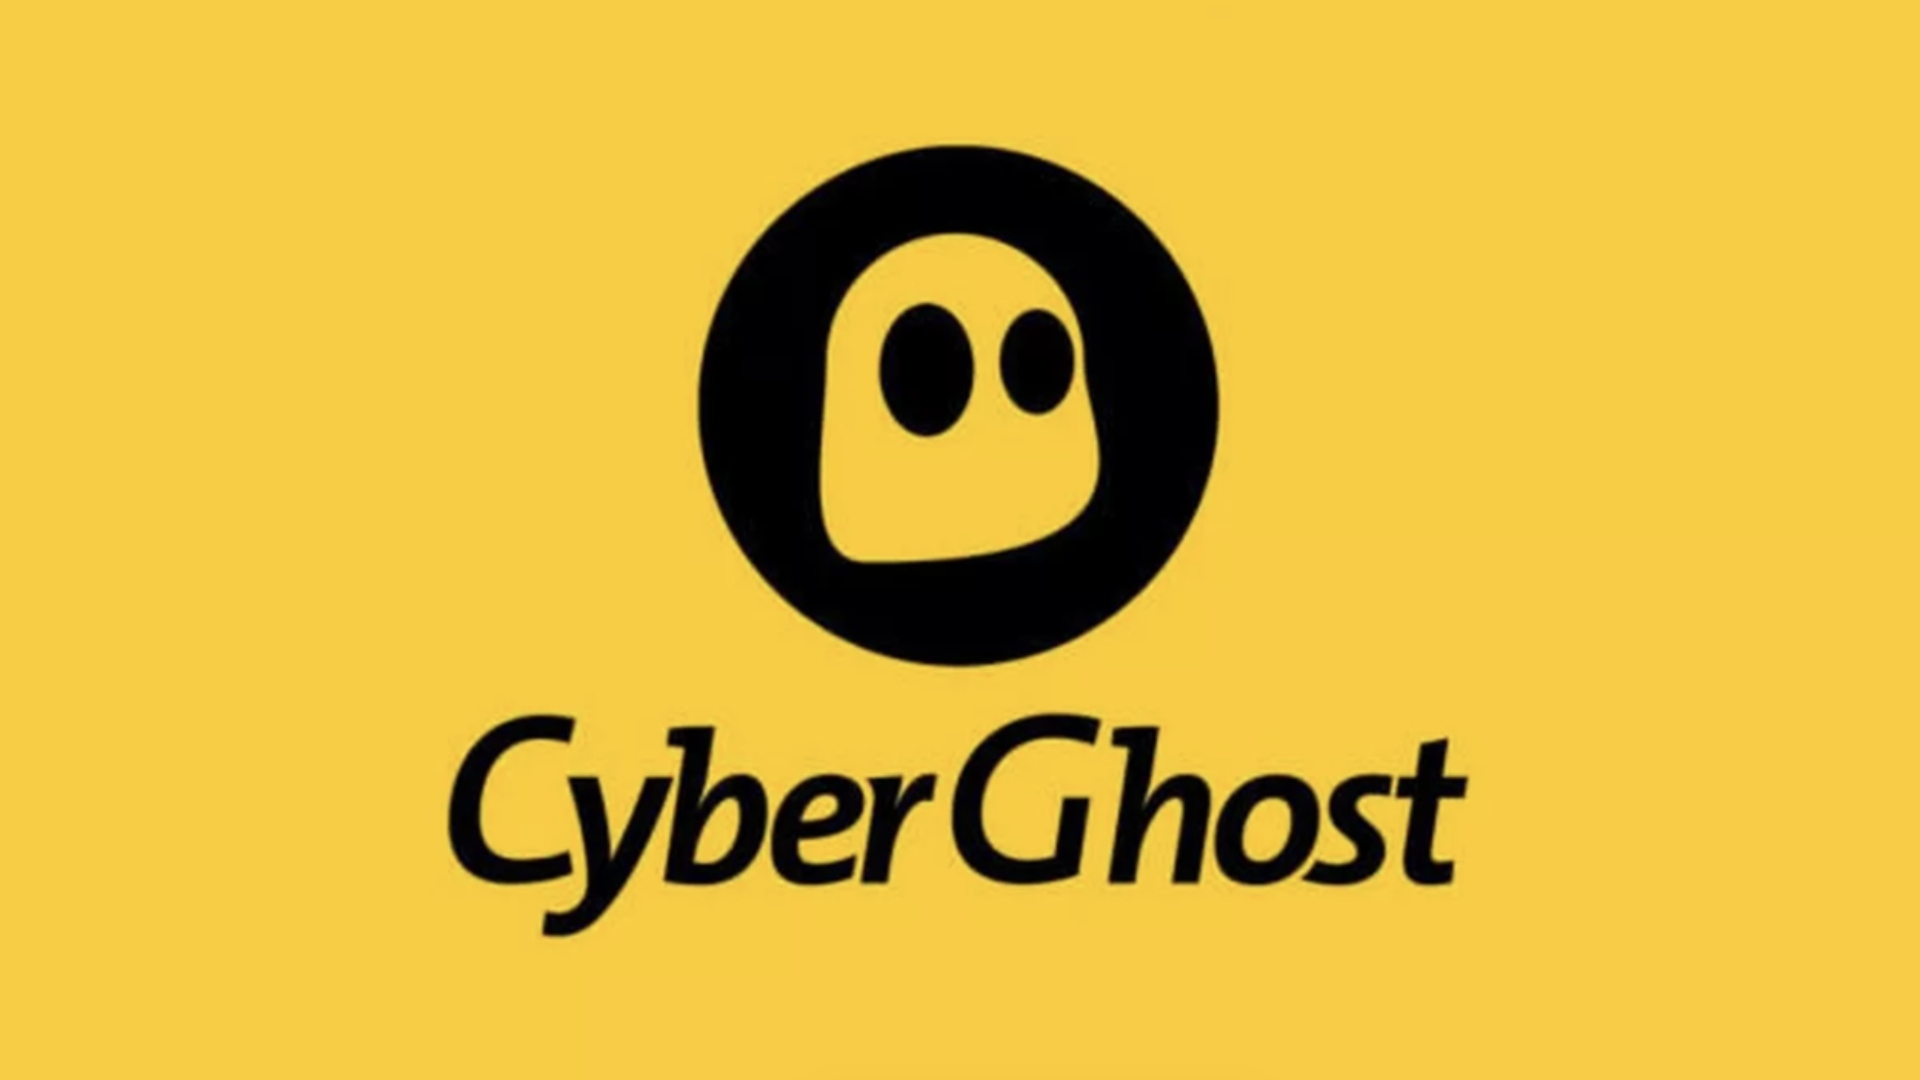 Best Indian VPN: CyberGhost. Image shows the company logo.